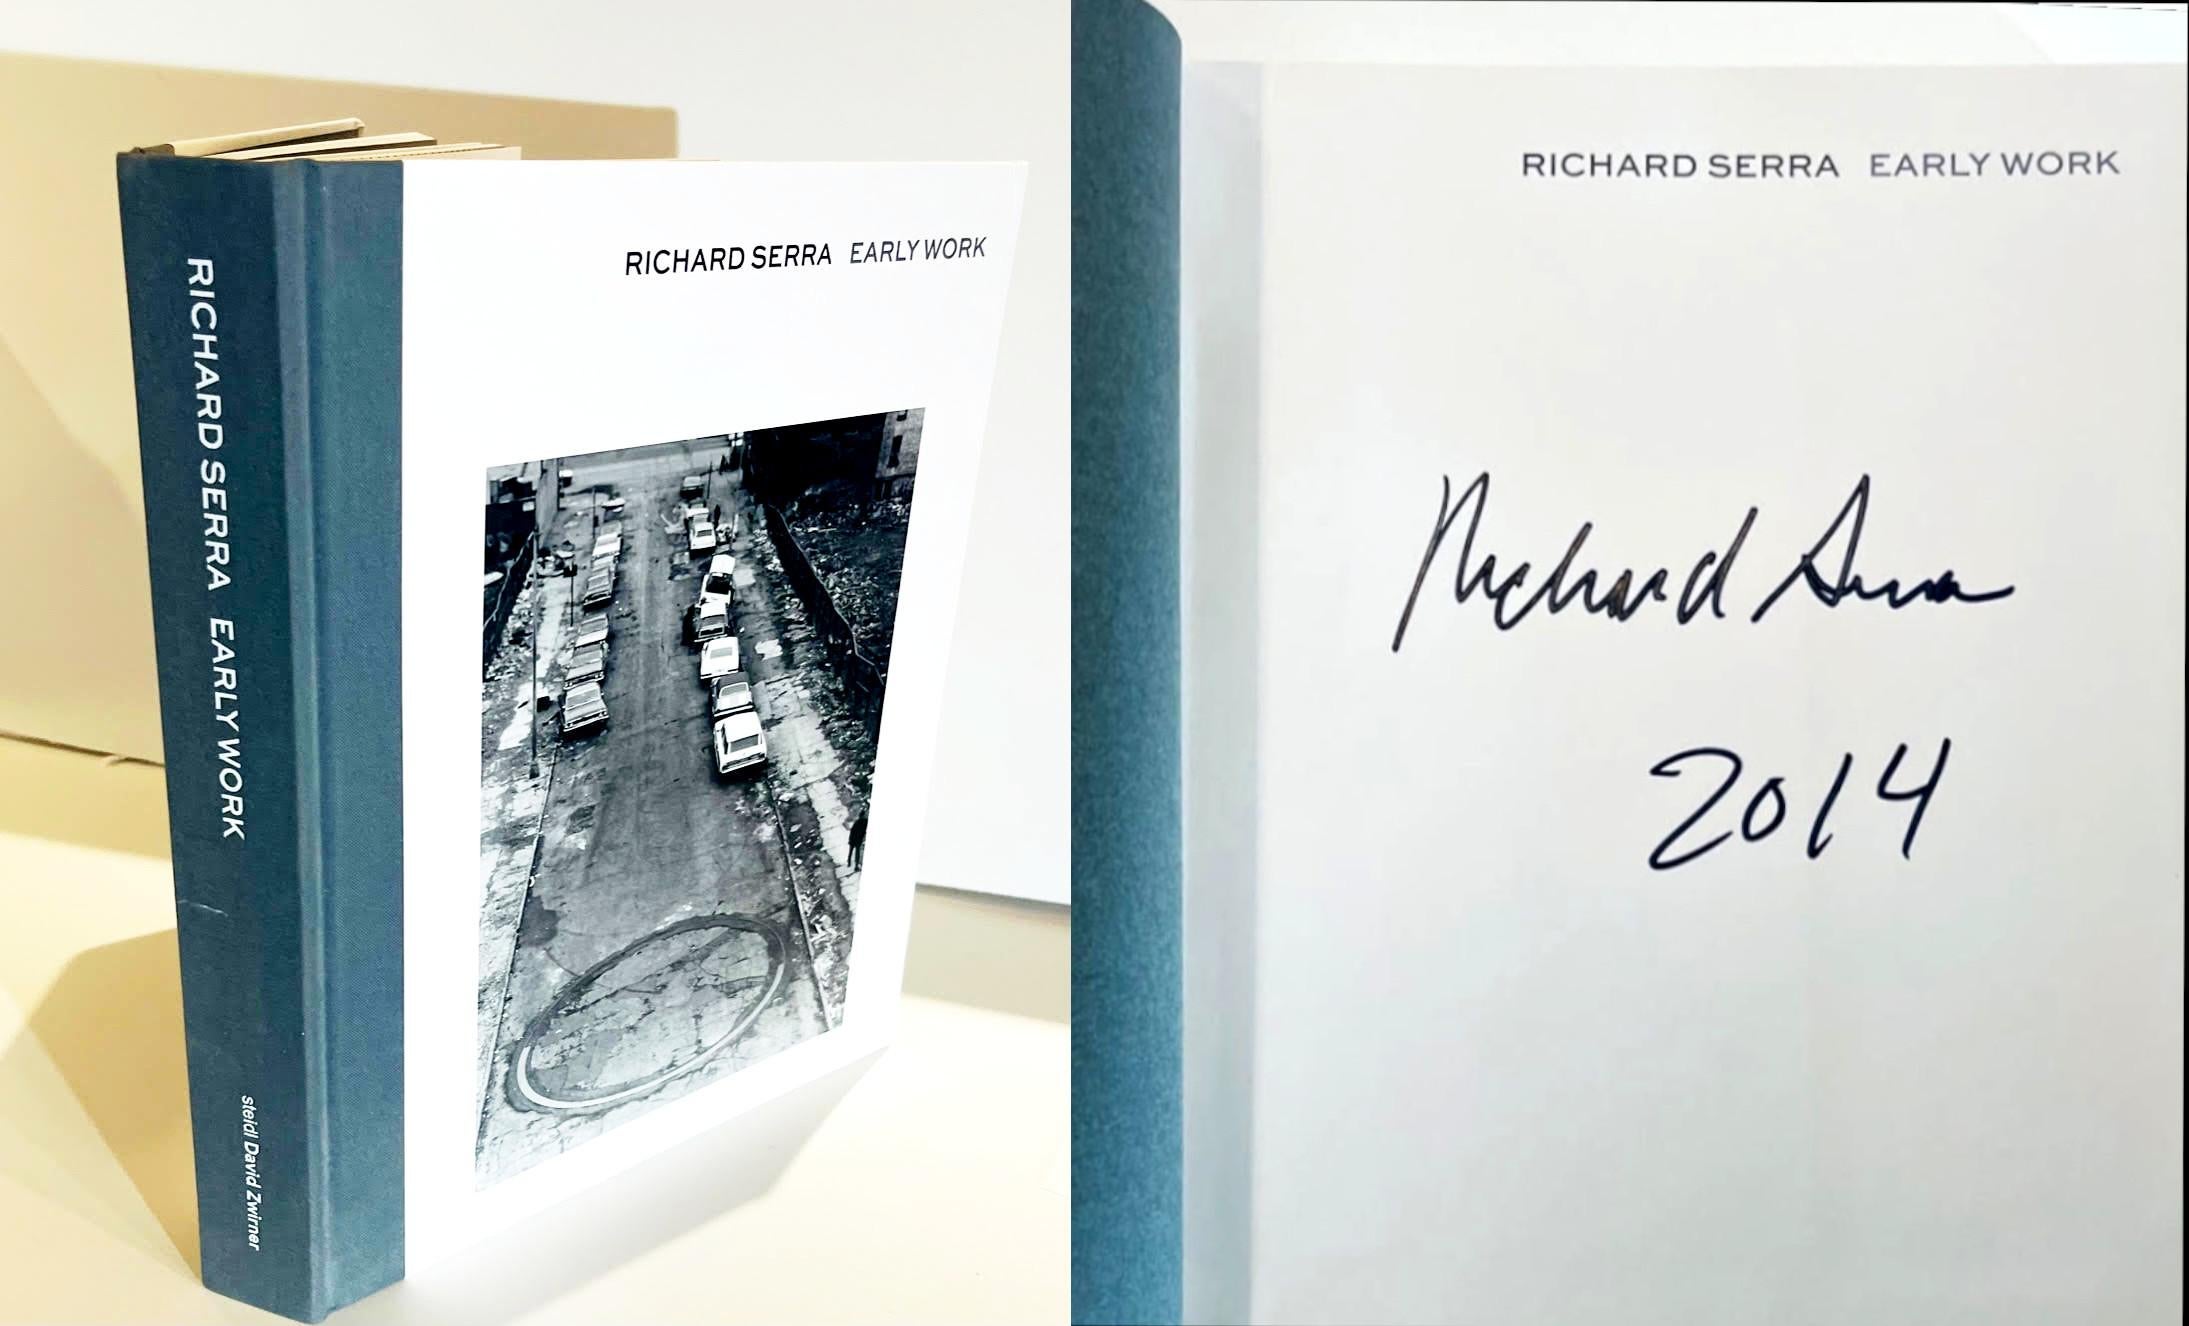 Richard Serra Early Work (Hand signed and dated by Richard Serra), 2013
Hardback monograph with no dust jacket as issued (Hand signed and dated 2014 by Richard Serra)
 Hand signed and dated 2014 by Richard Serra on the title page
12 × 10 × 1 3/5